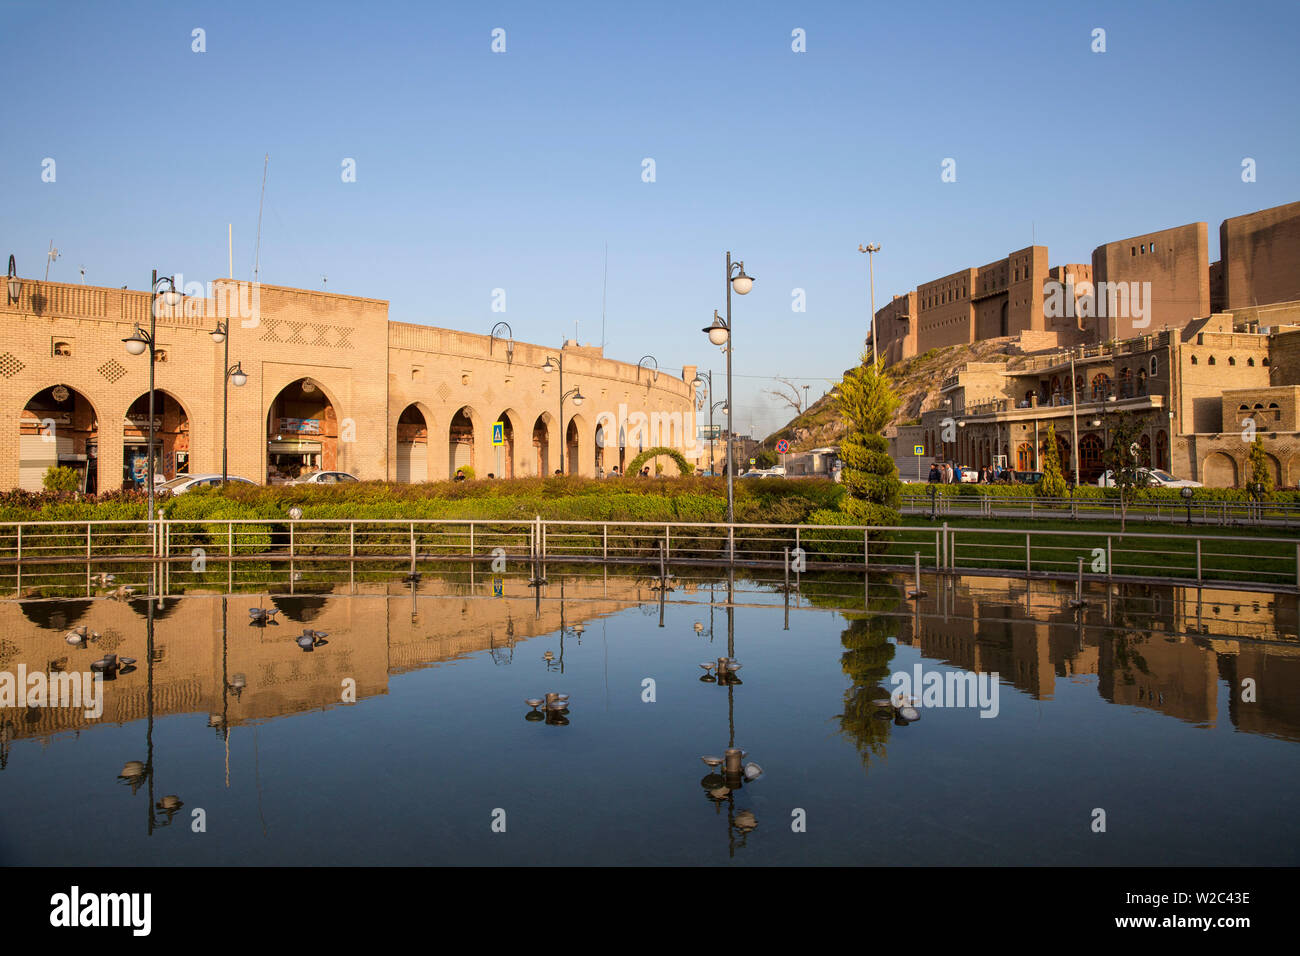 Iraq, Kurdistan, Erbil, Qaysari Bazaars, Shar park and The Citadel -  claimed to be the oldest continuously inhabited town in the world Stock Photo